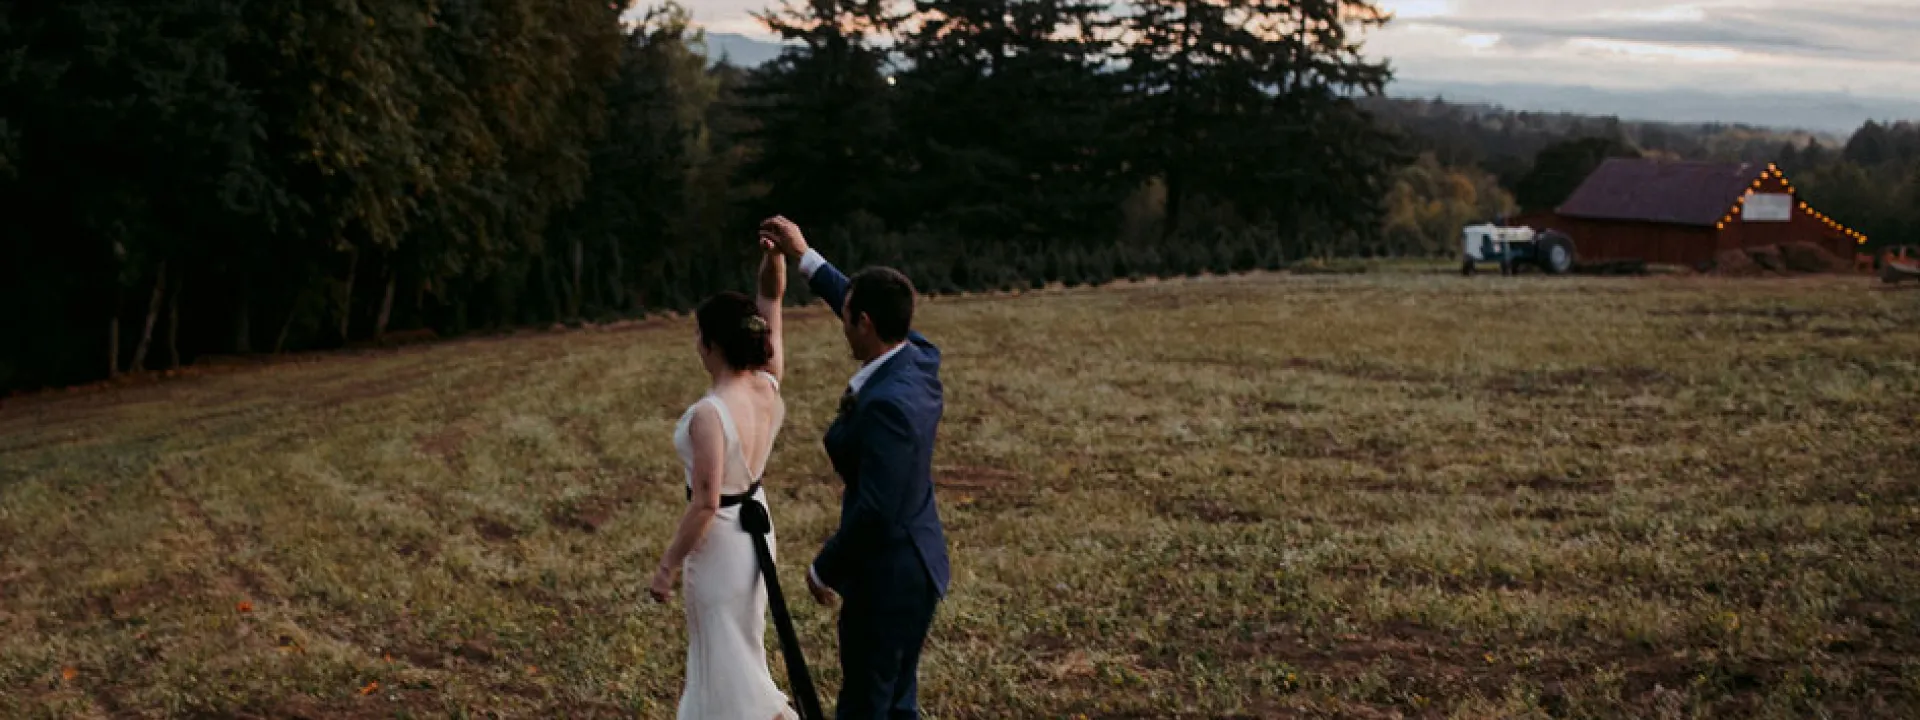 The bride and groom dance in a field at sunset.